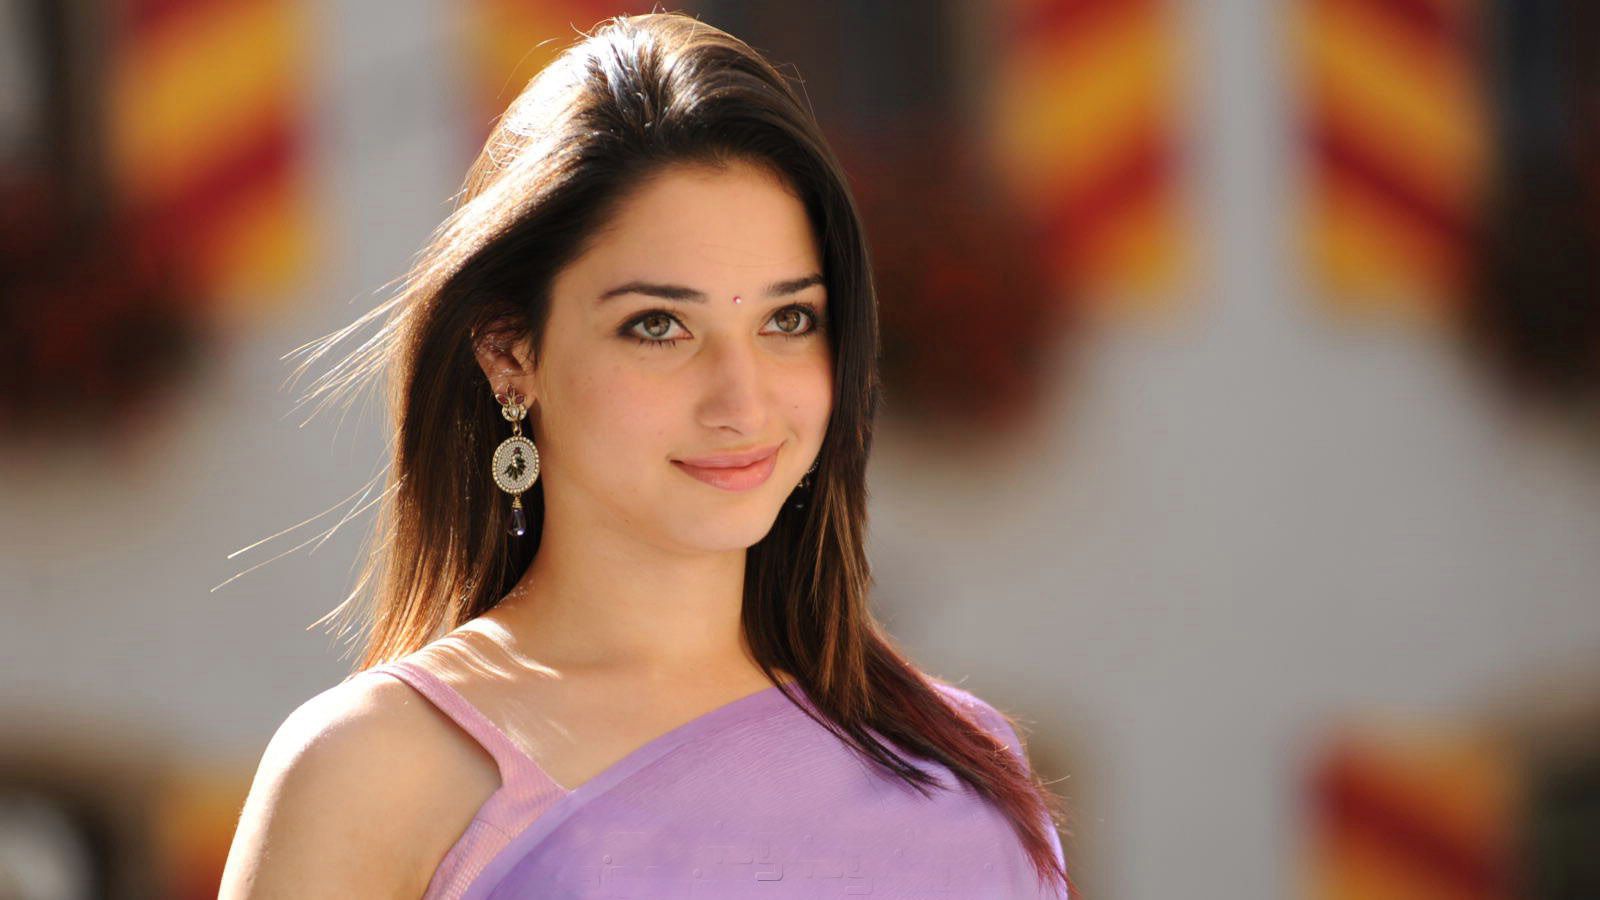 Baahubali heroine Tamanna Bhatia observed some pictures you will not